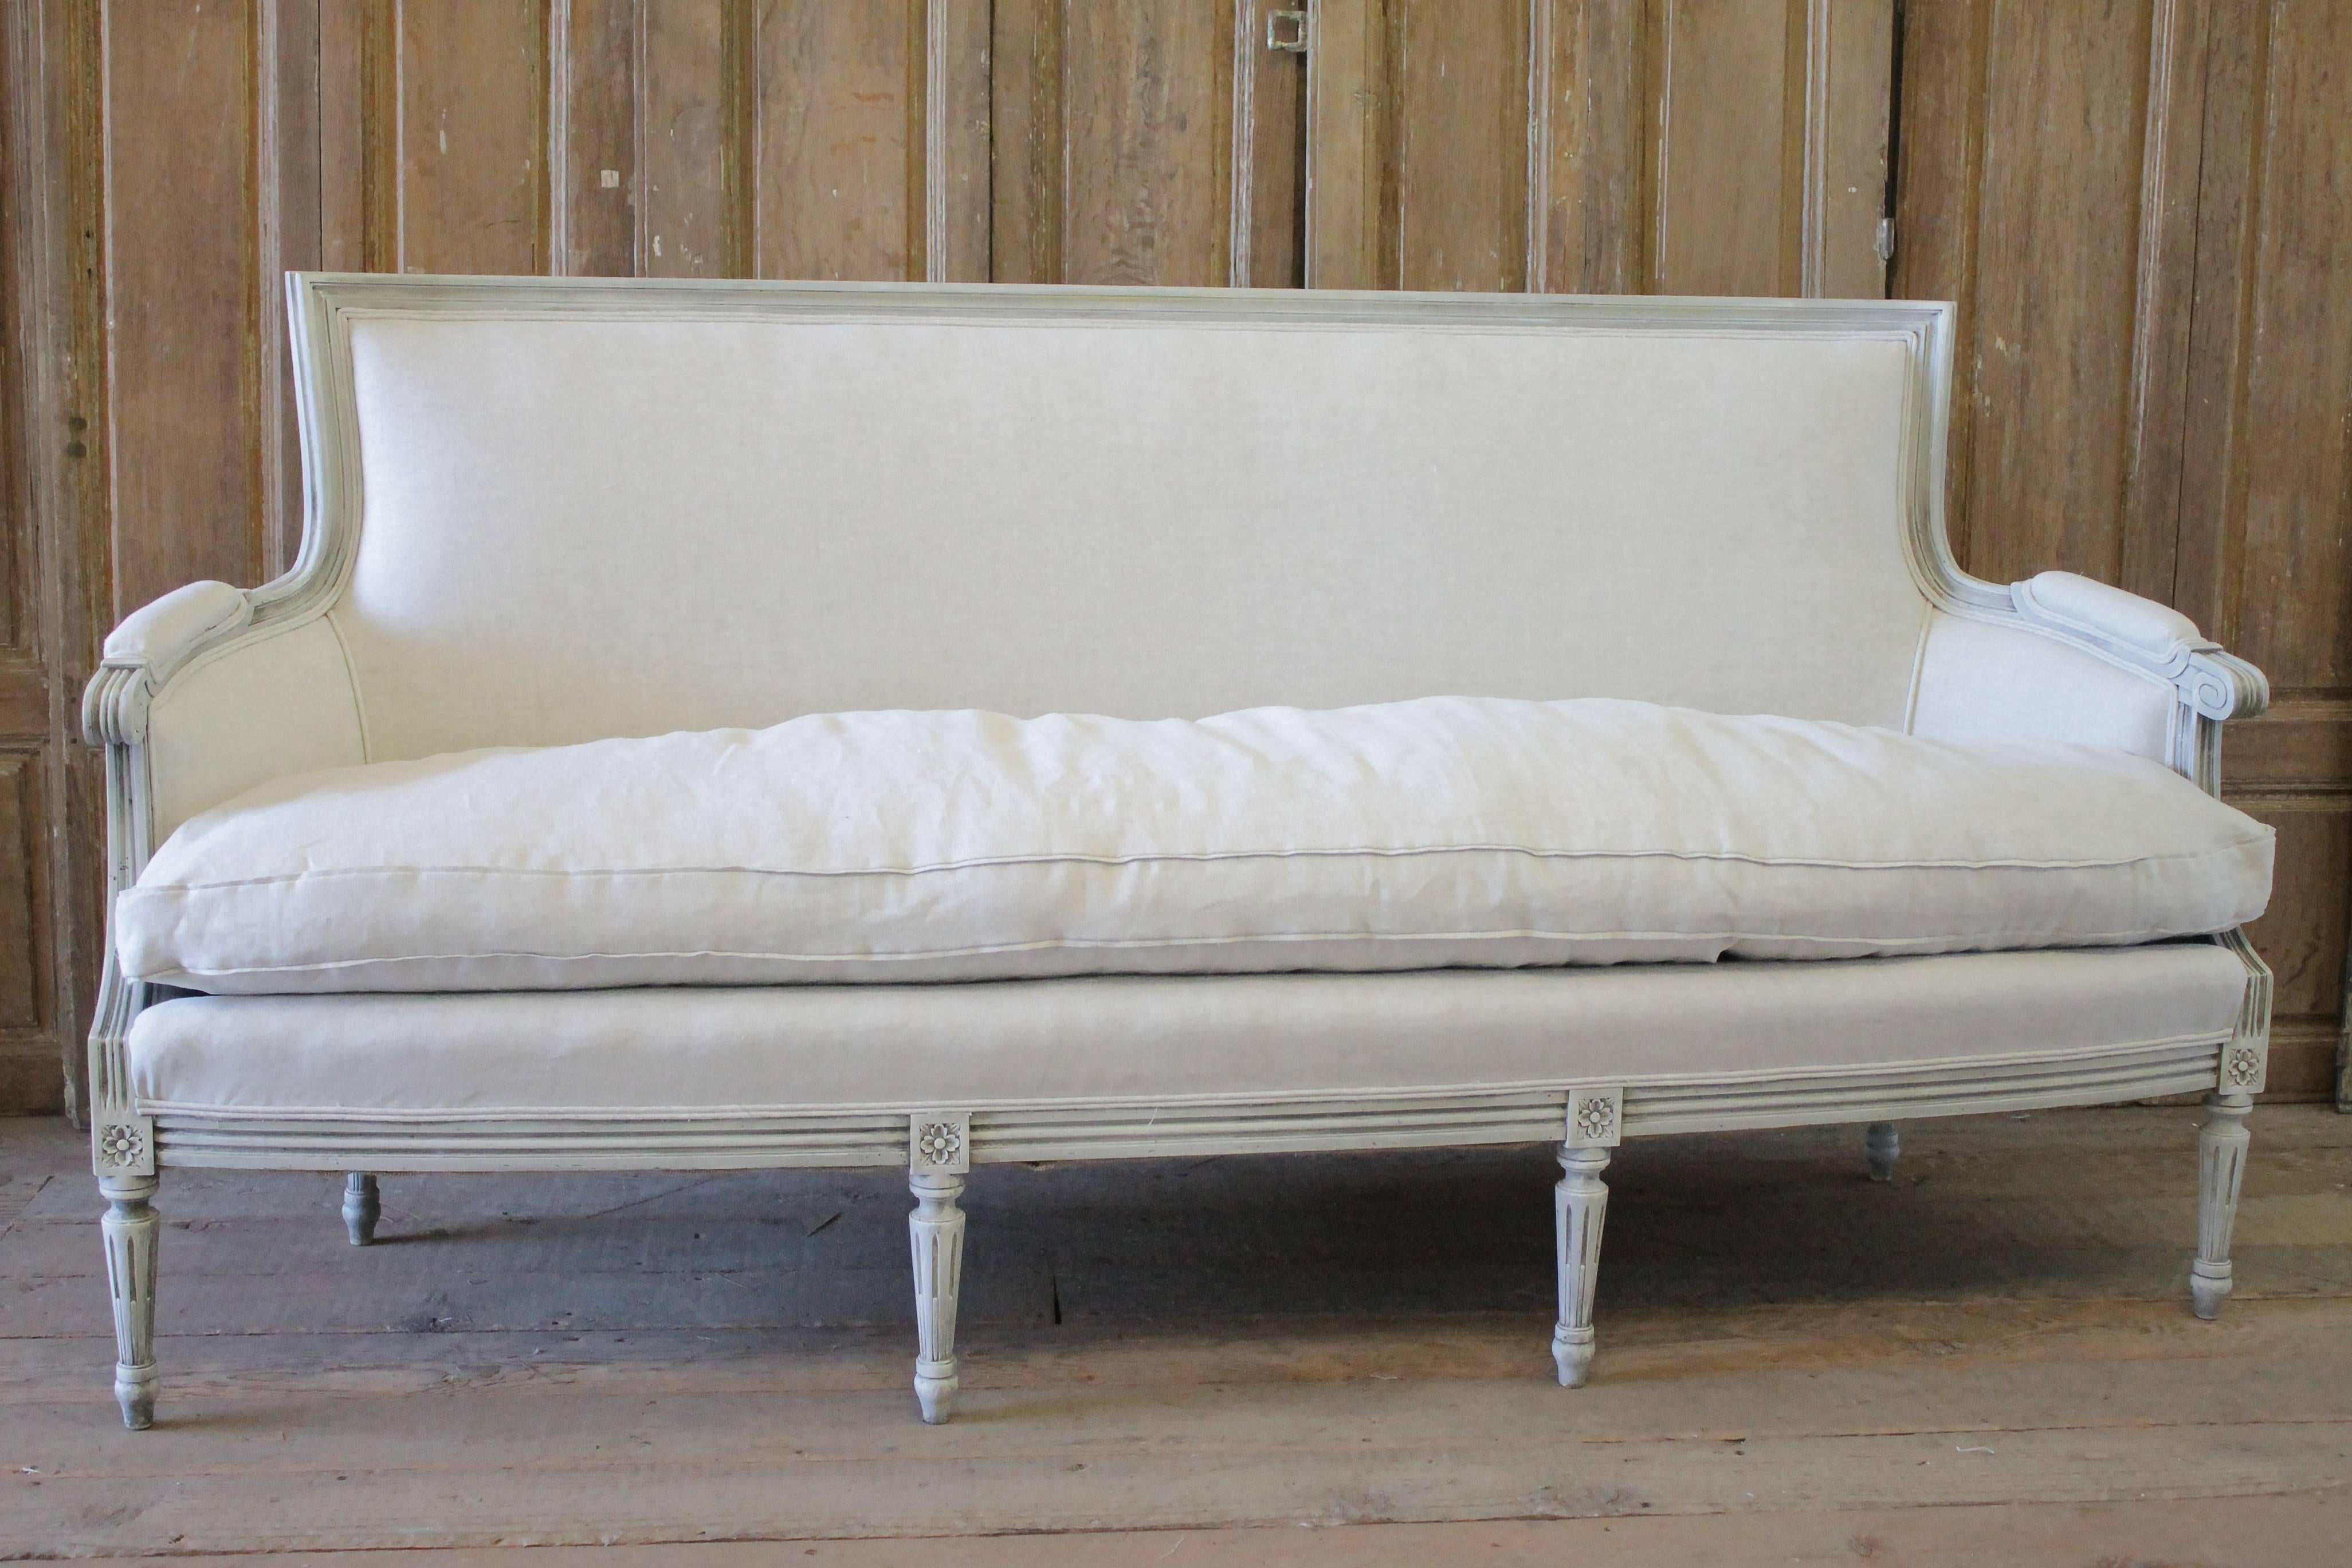 20th century carved Louis XVI style painted French sofa upholstered in linen
Painted in an oyster white with subtle distressed edges and hand glazed patina. Color come across as an off-white, with subtle greyish tone. Upholstered in a 100% pure